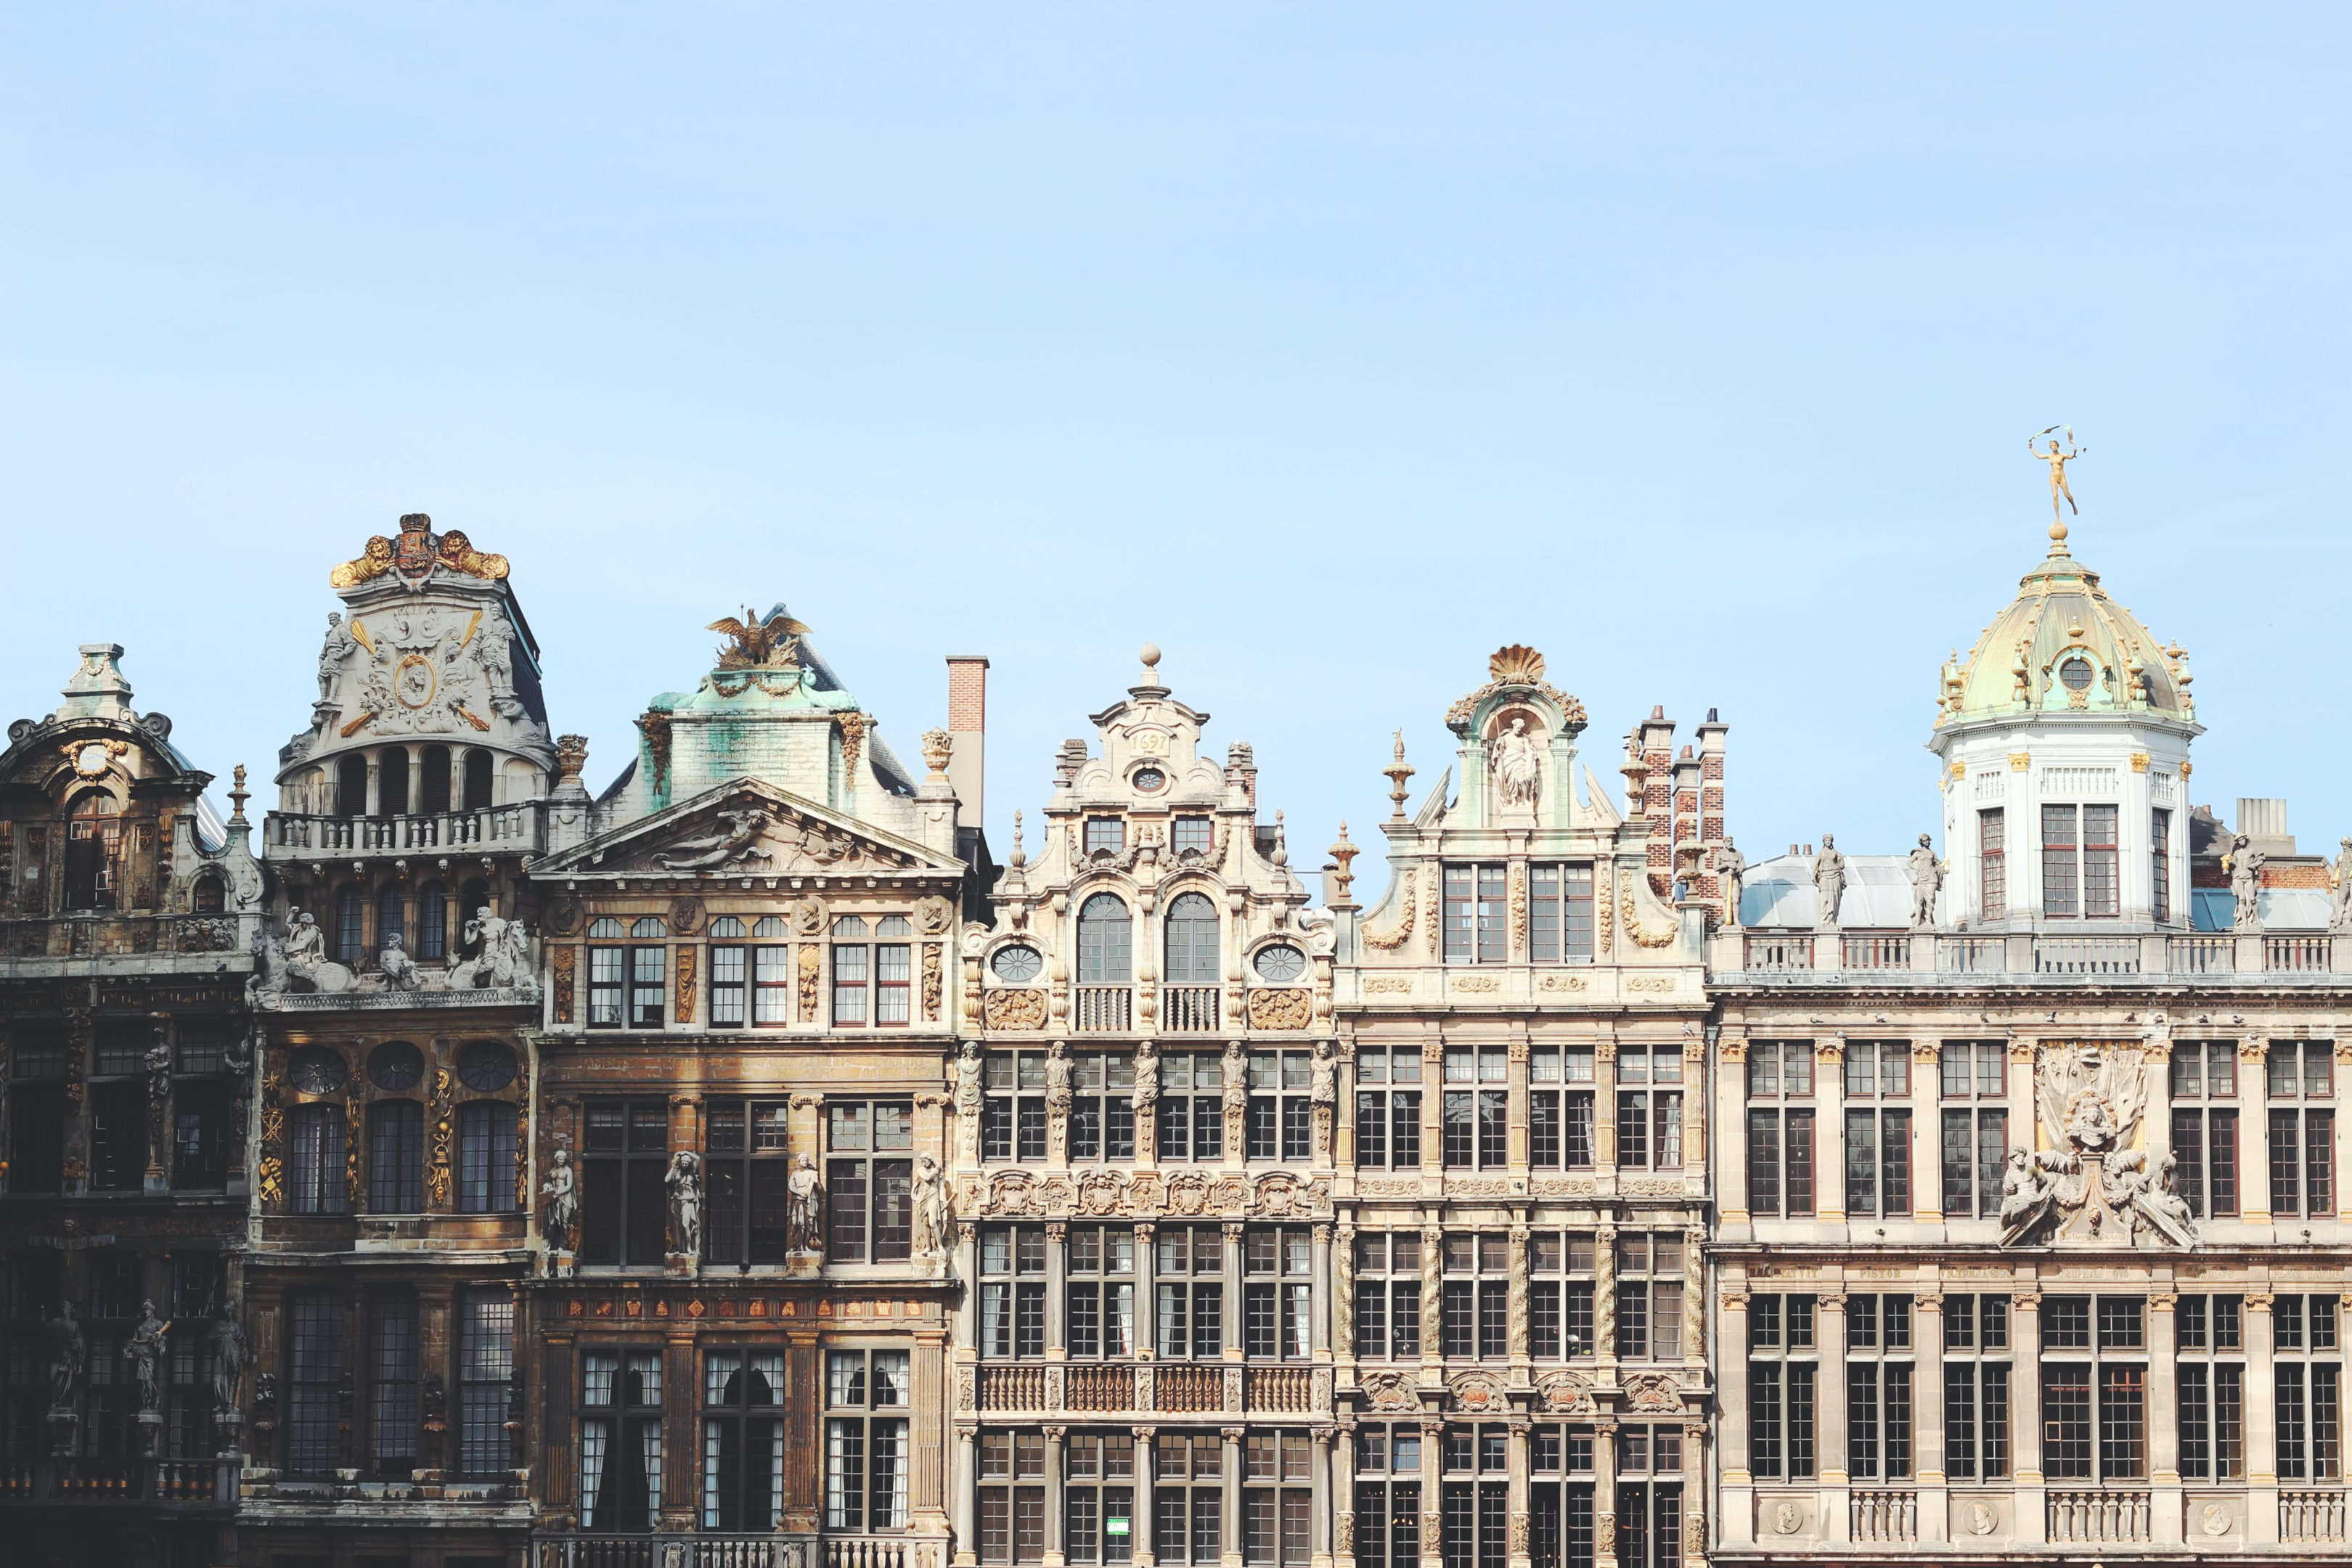 The Grand Place (Grote Markt) in Brussels, Belgium.